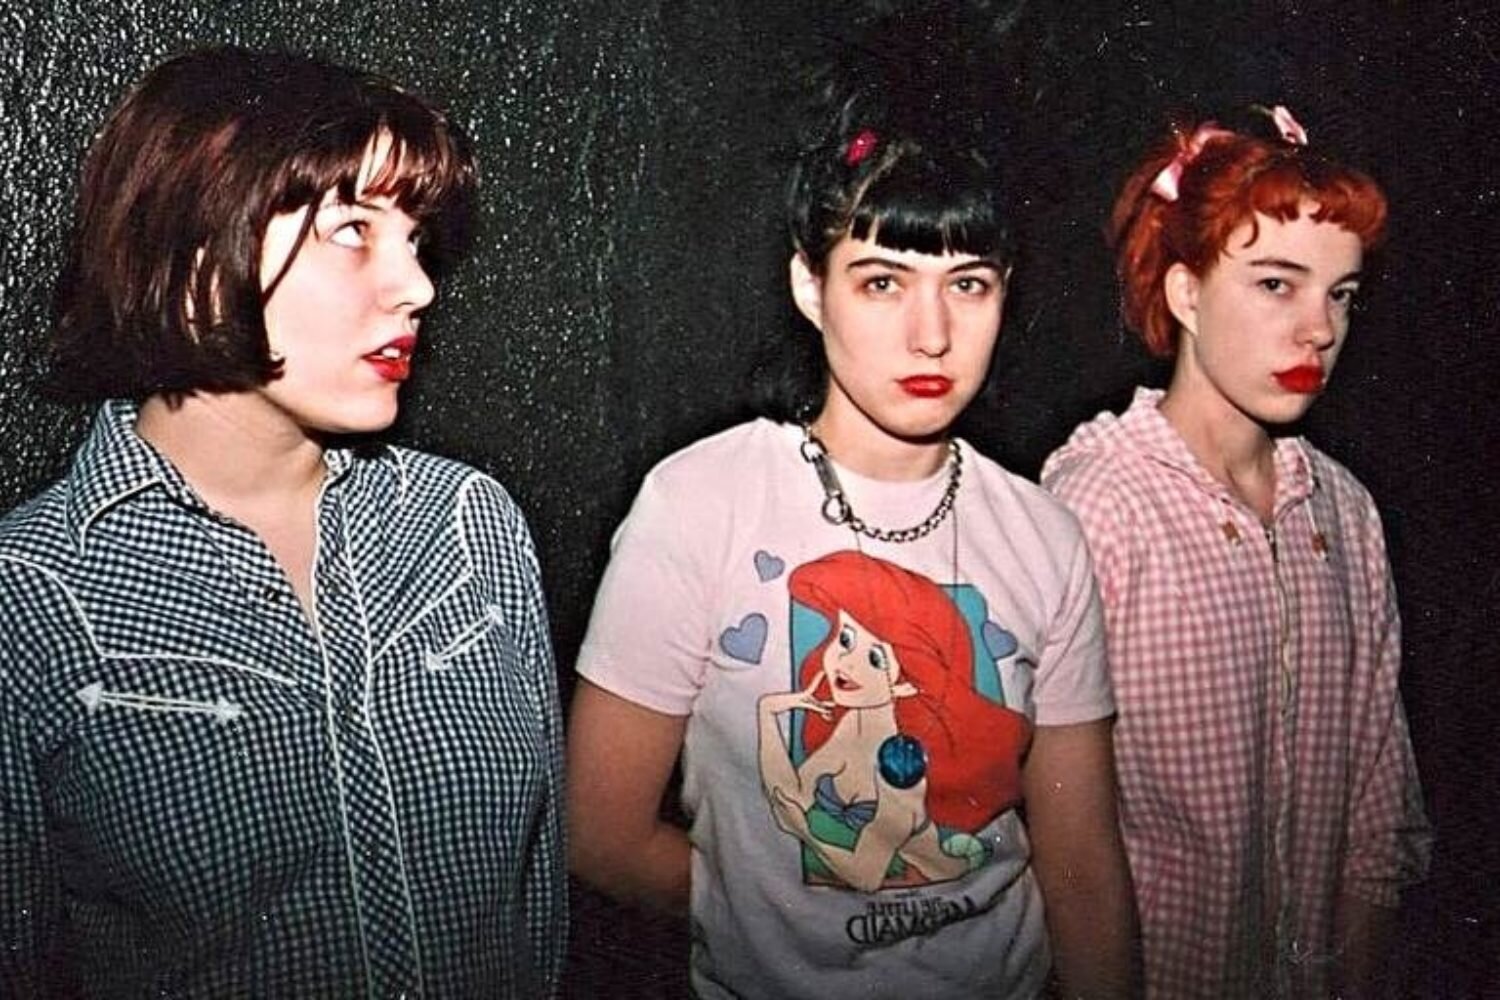 <a href="https://www.thefader.com/2013/06/12/interview-kathleen-hanna-and-kathi-wilcox-of-bikini-kill" target="_blank">THE FADER</a>